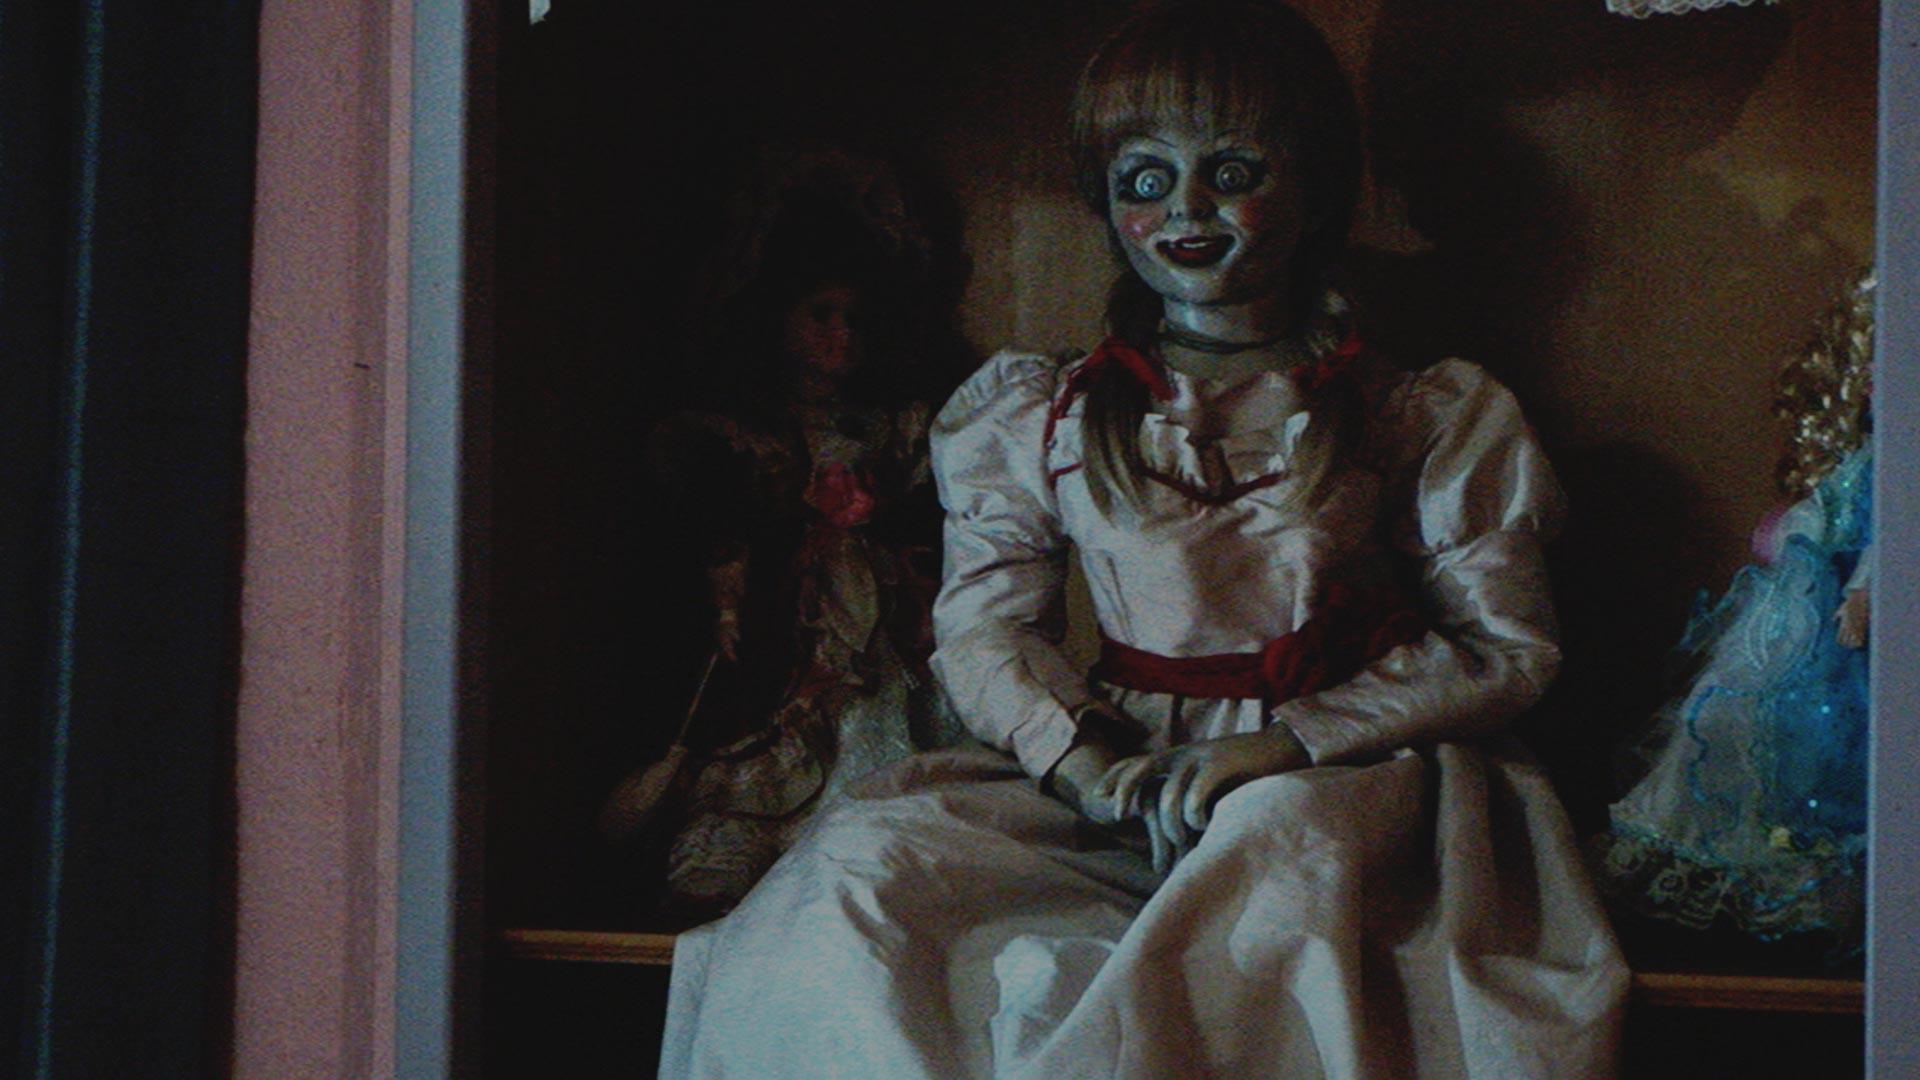 annabelle movie download in hd